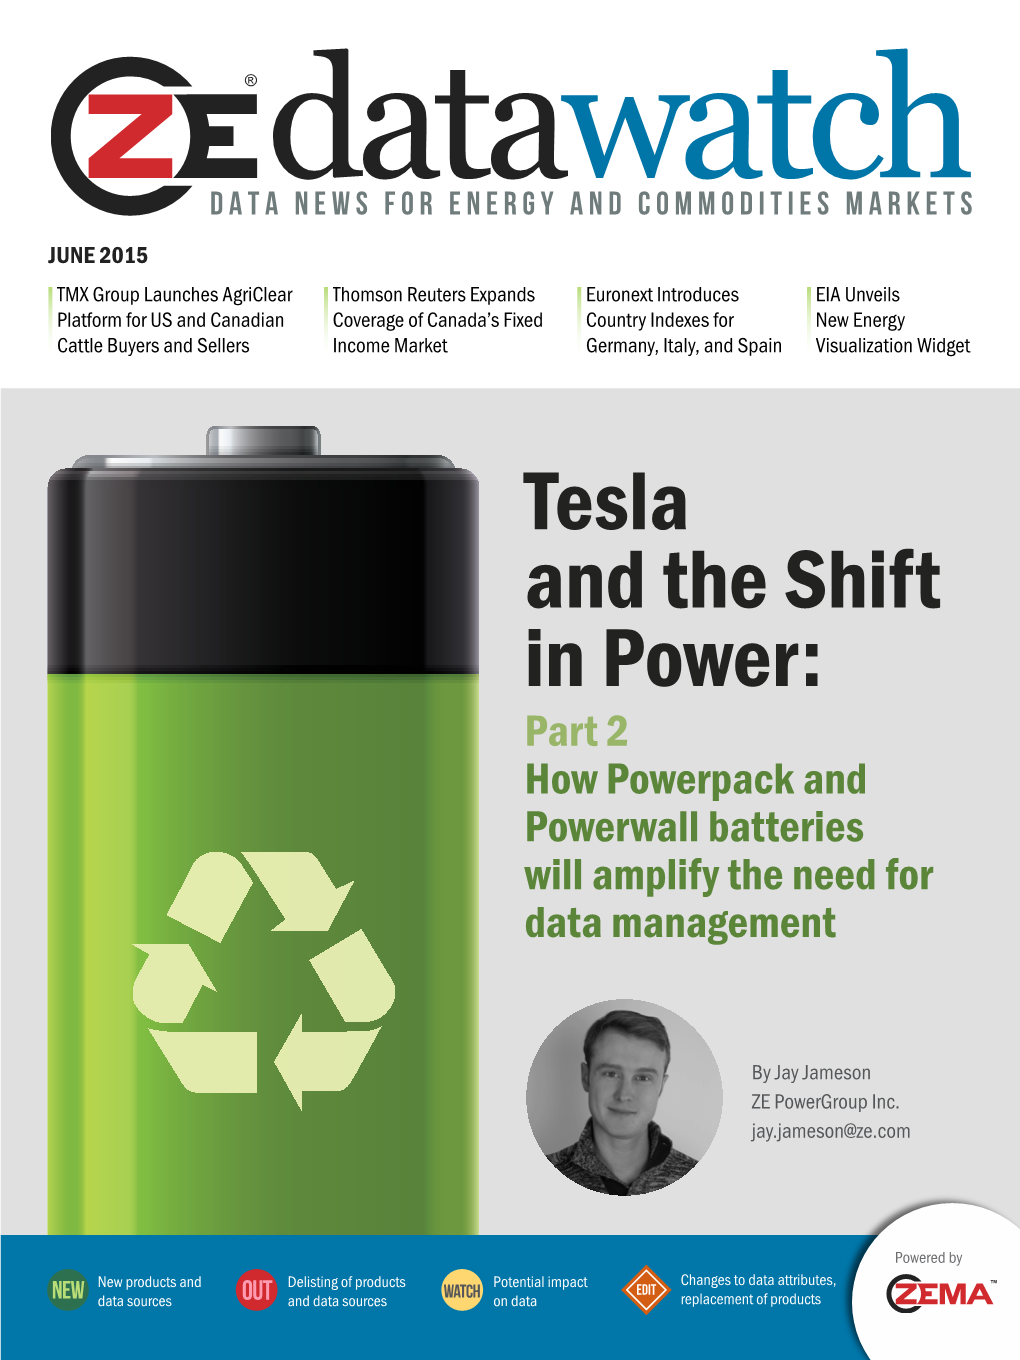 Tesla and the Shift in Power: Part 2 How Powerpack and Powerwall Batteries Will Amplify the Need for Data Management